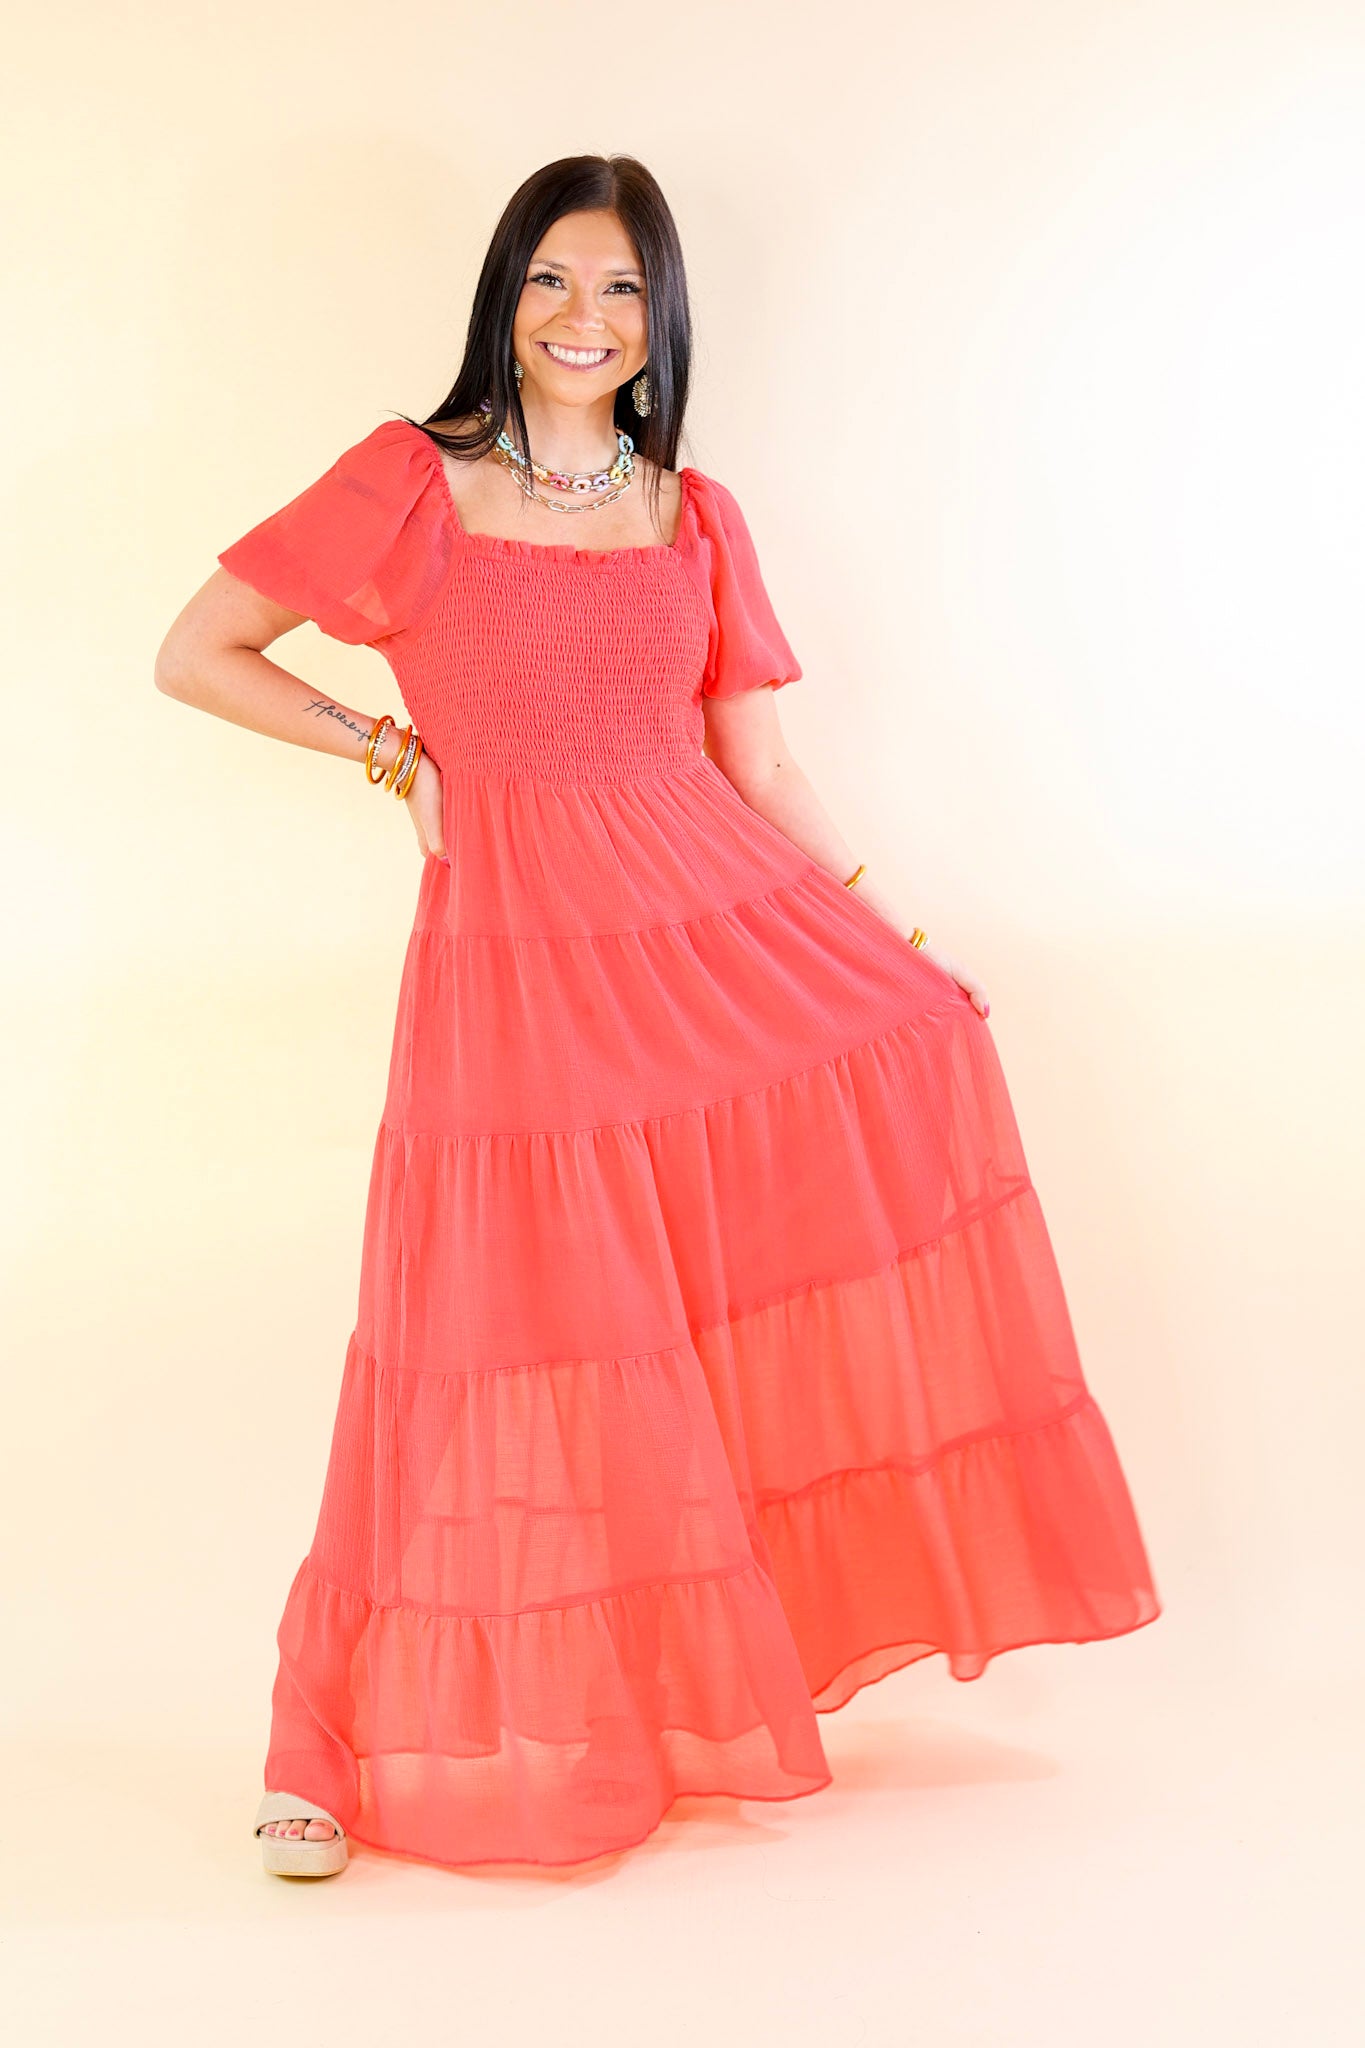 Honeysuckle Love Tiered Maxi Dress with Smocked Bodice in Coral Red